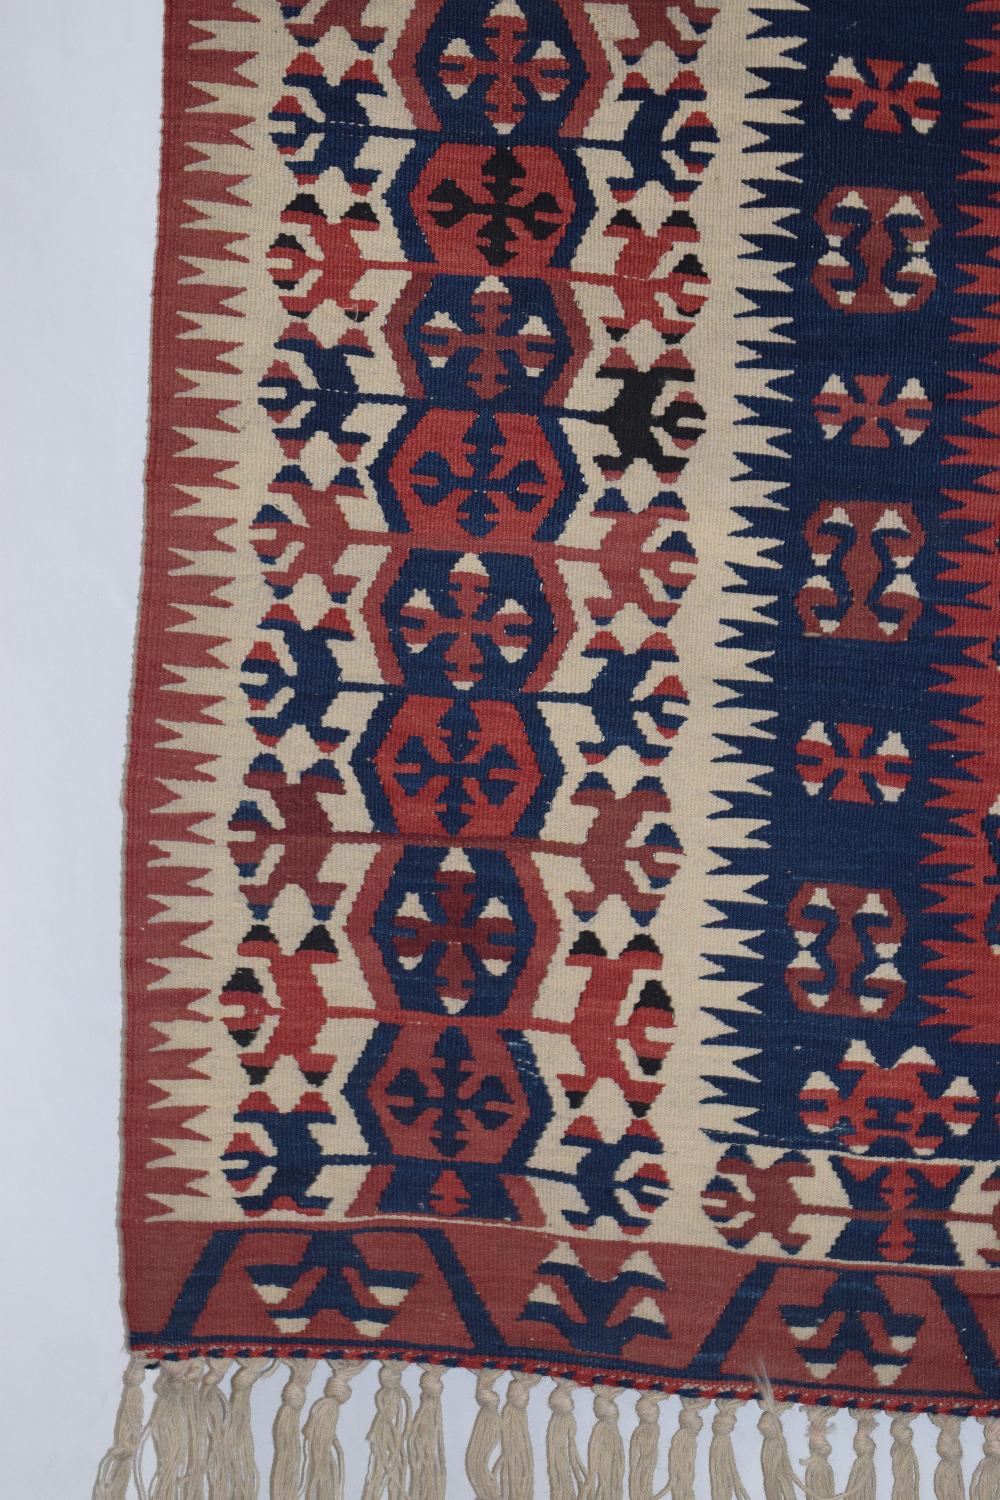 Two Anatolian rugs, the first: Konya kelim, central Anatolia, circa 1940s-50s, 4ft. 11in. X 3ft. - Image 9 of 17